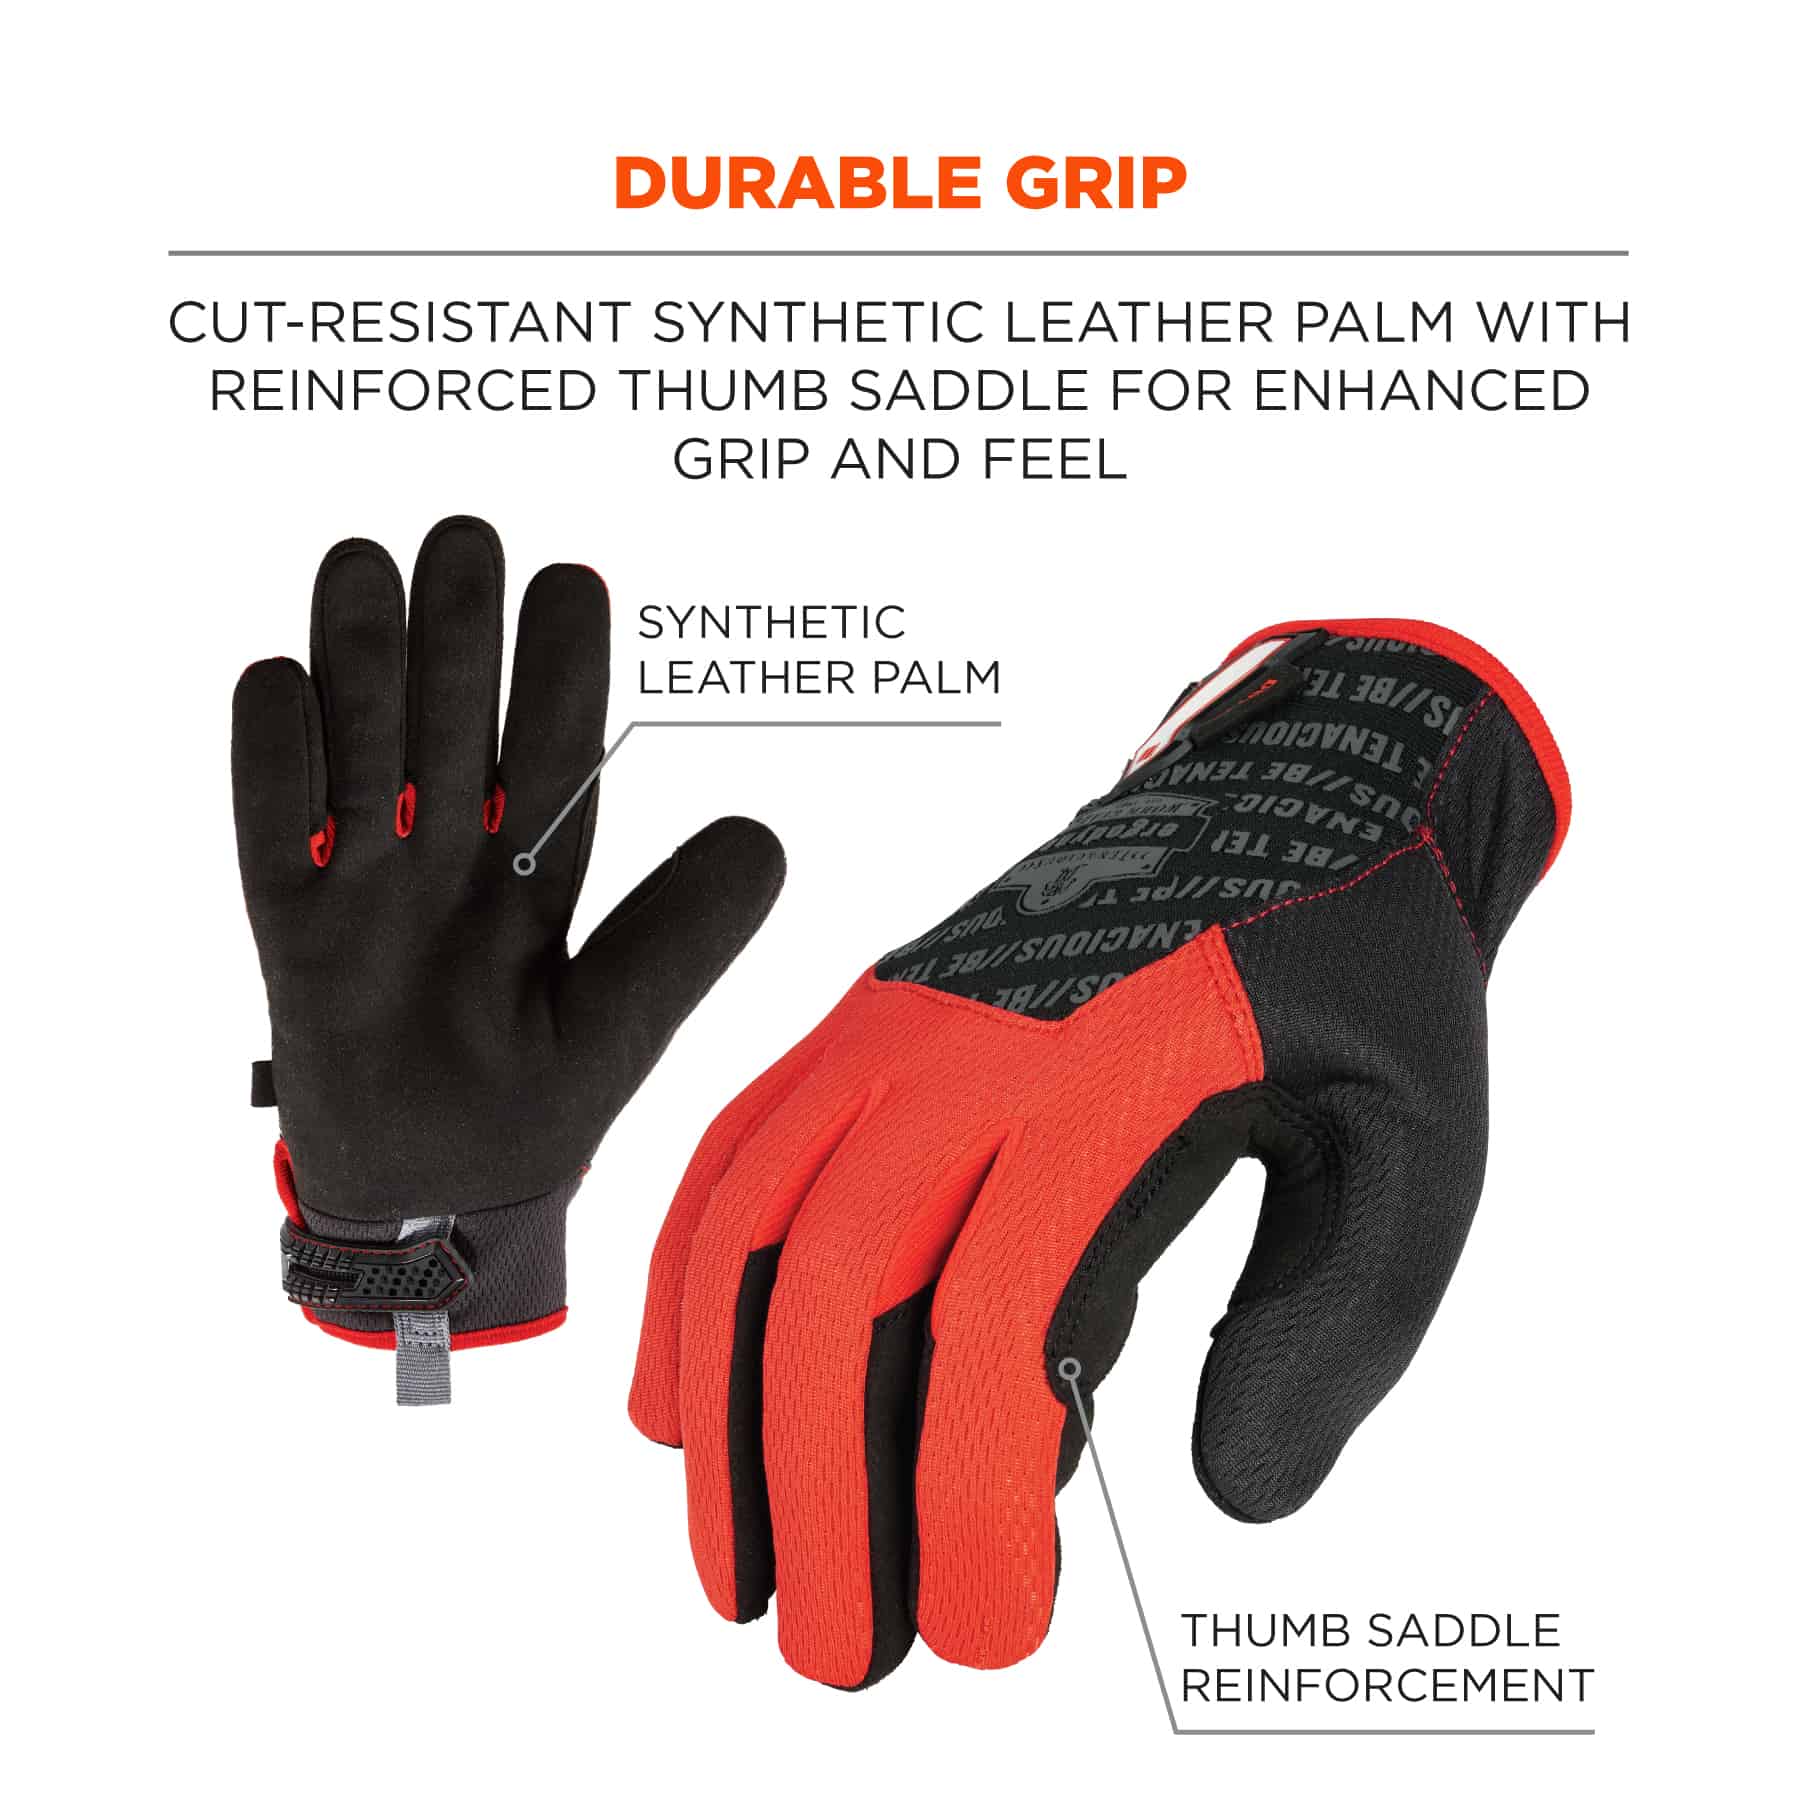 812CRG Gloves provide Level 5 cut-resistance against sharp objects and blades